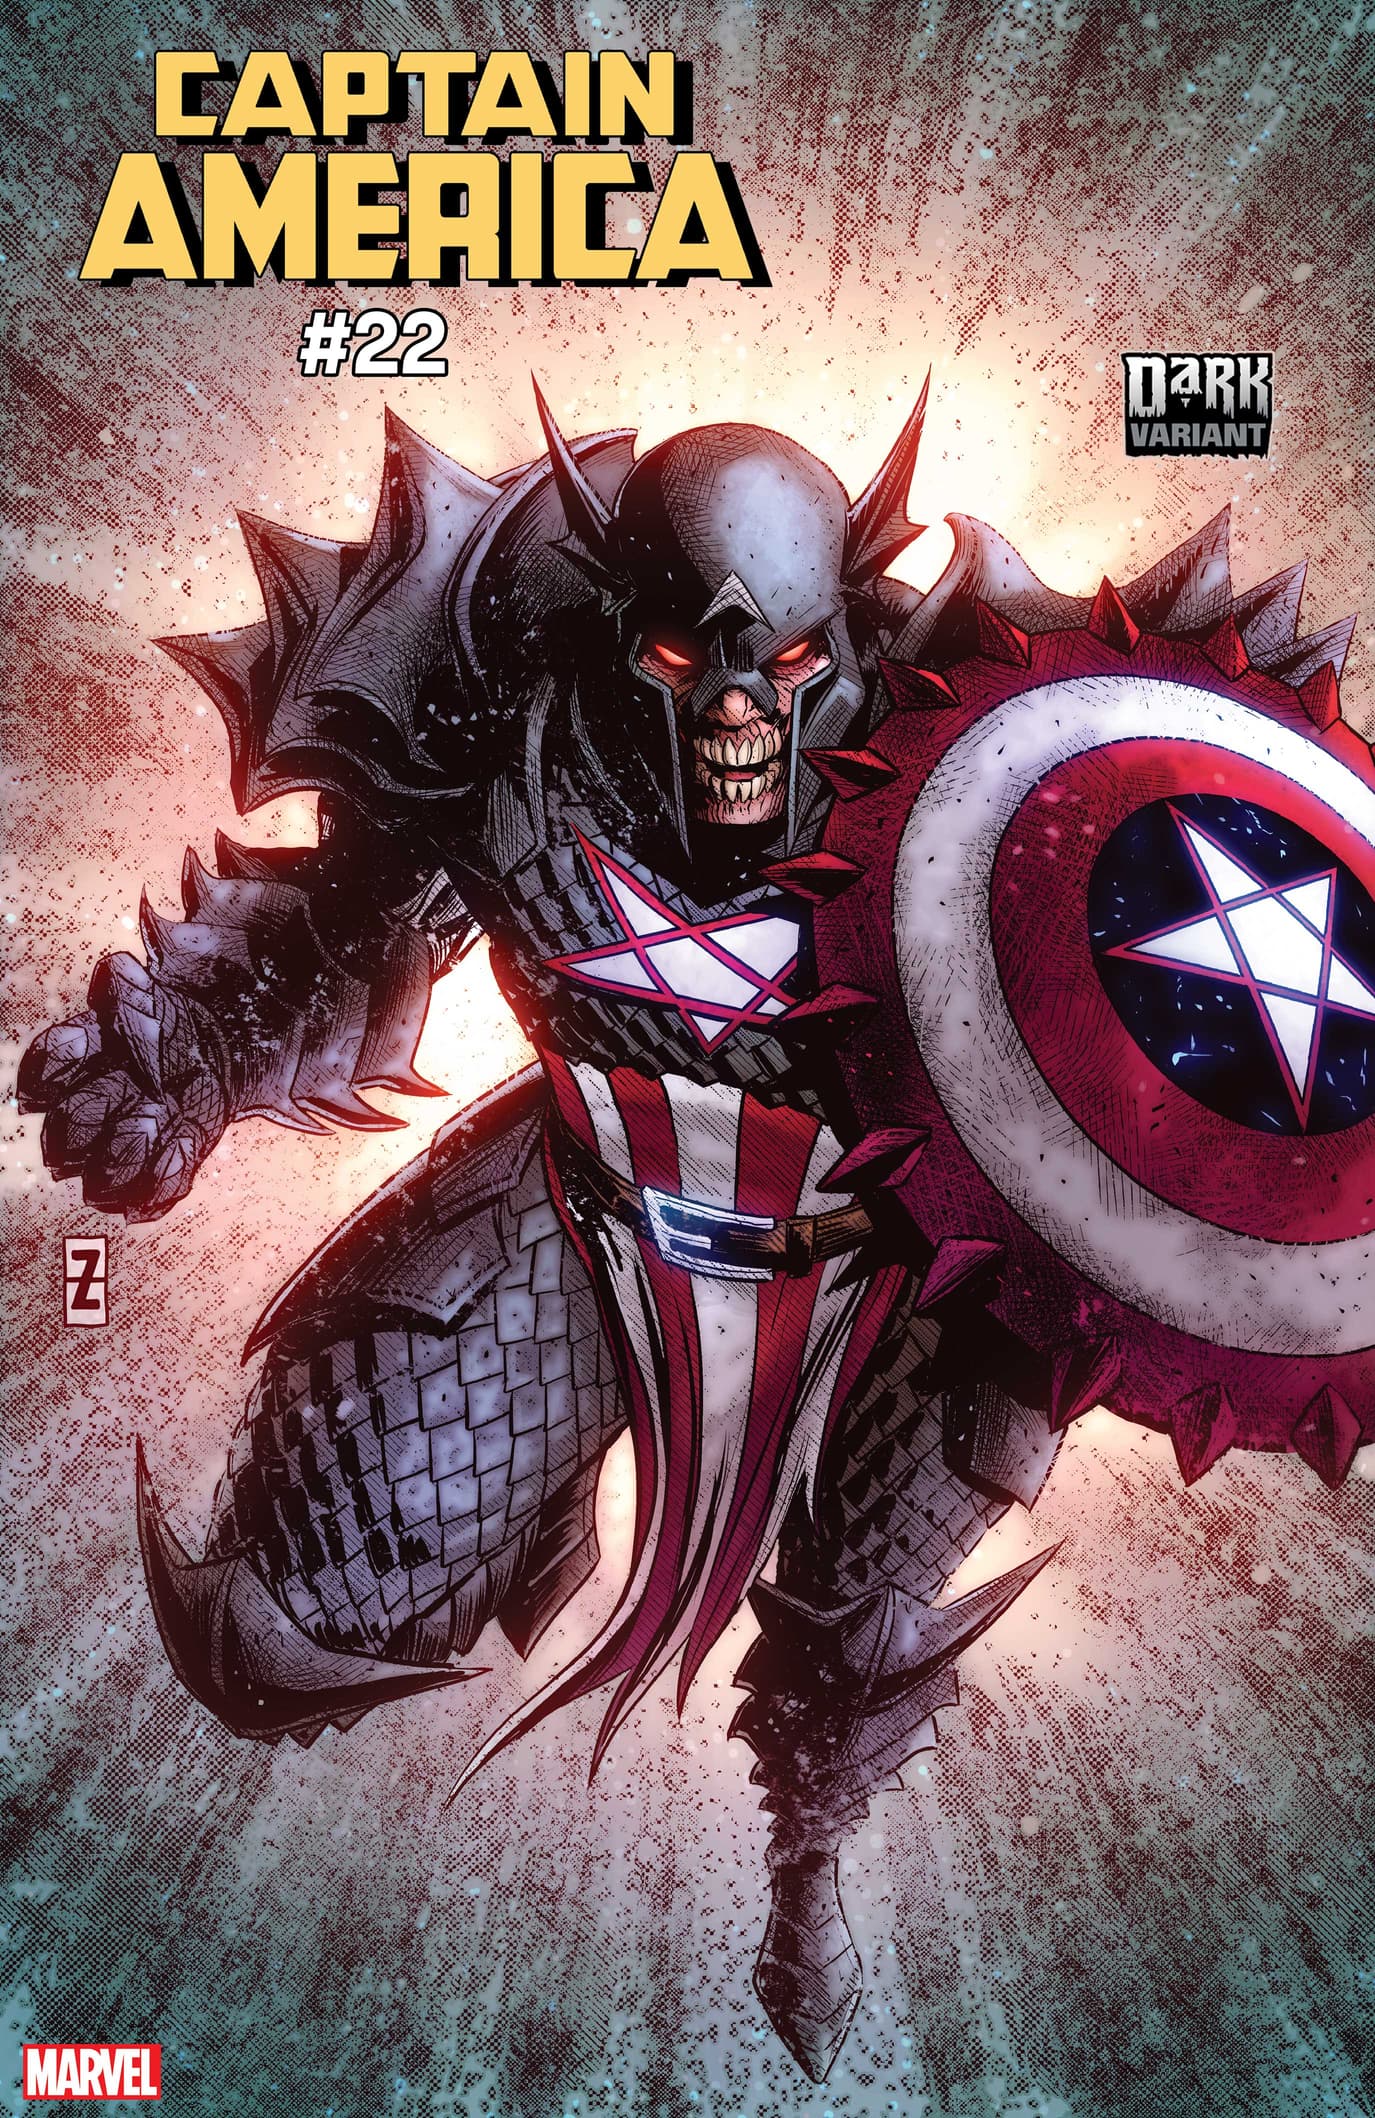 CAPTAIN AMERICA #22 DARK MARVEL VARIANT by PATCH ZIRCHER with colors by MORRY HOLLOWELL 